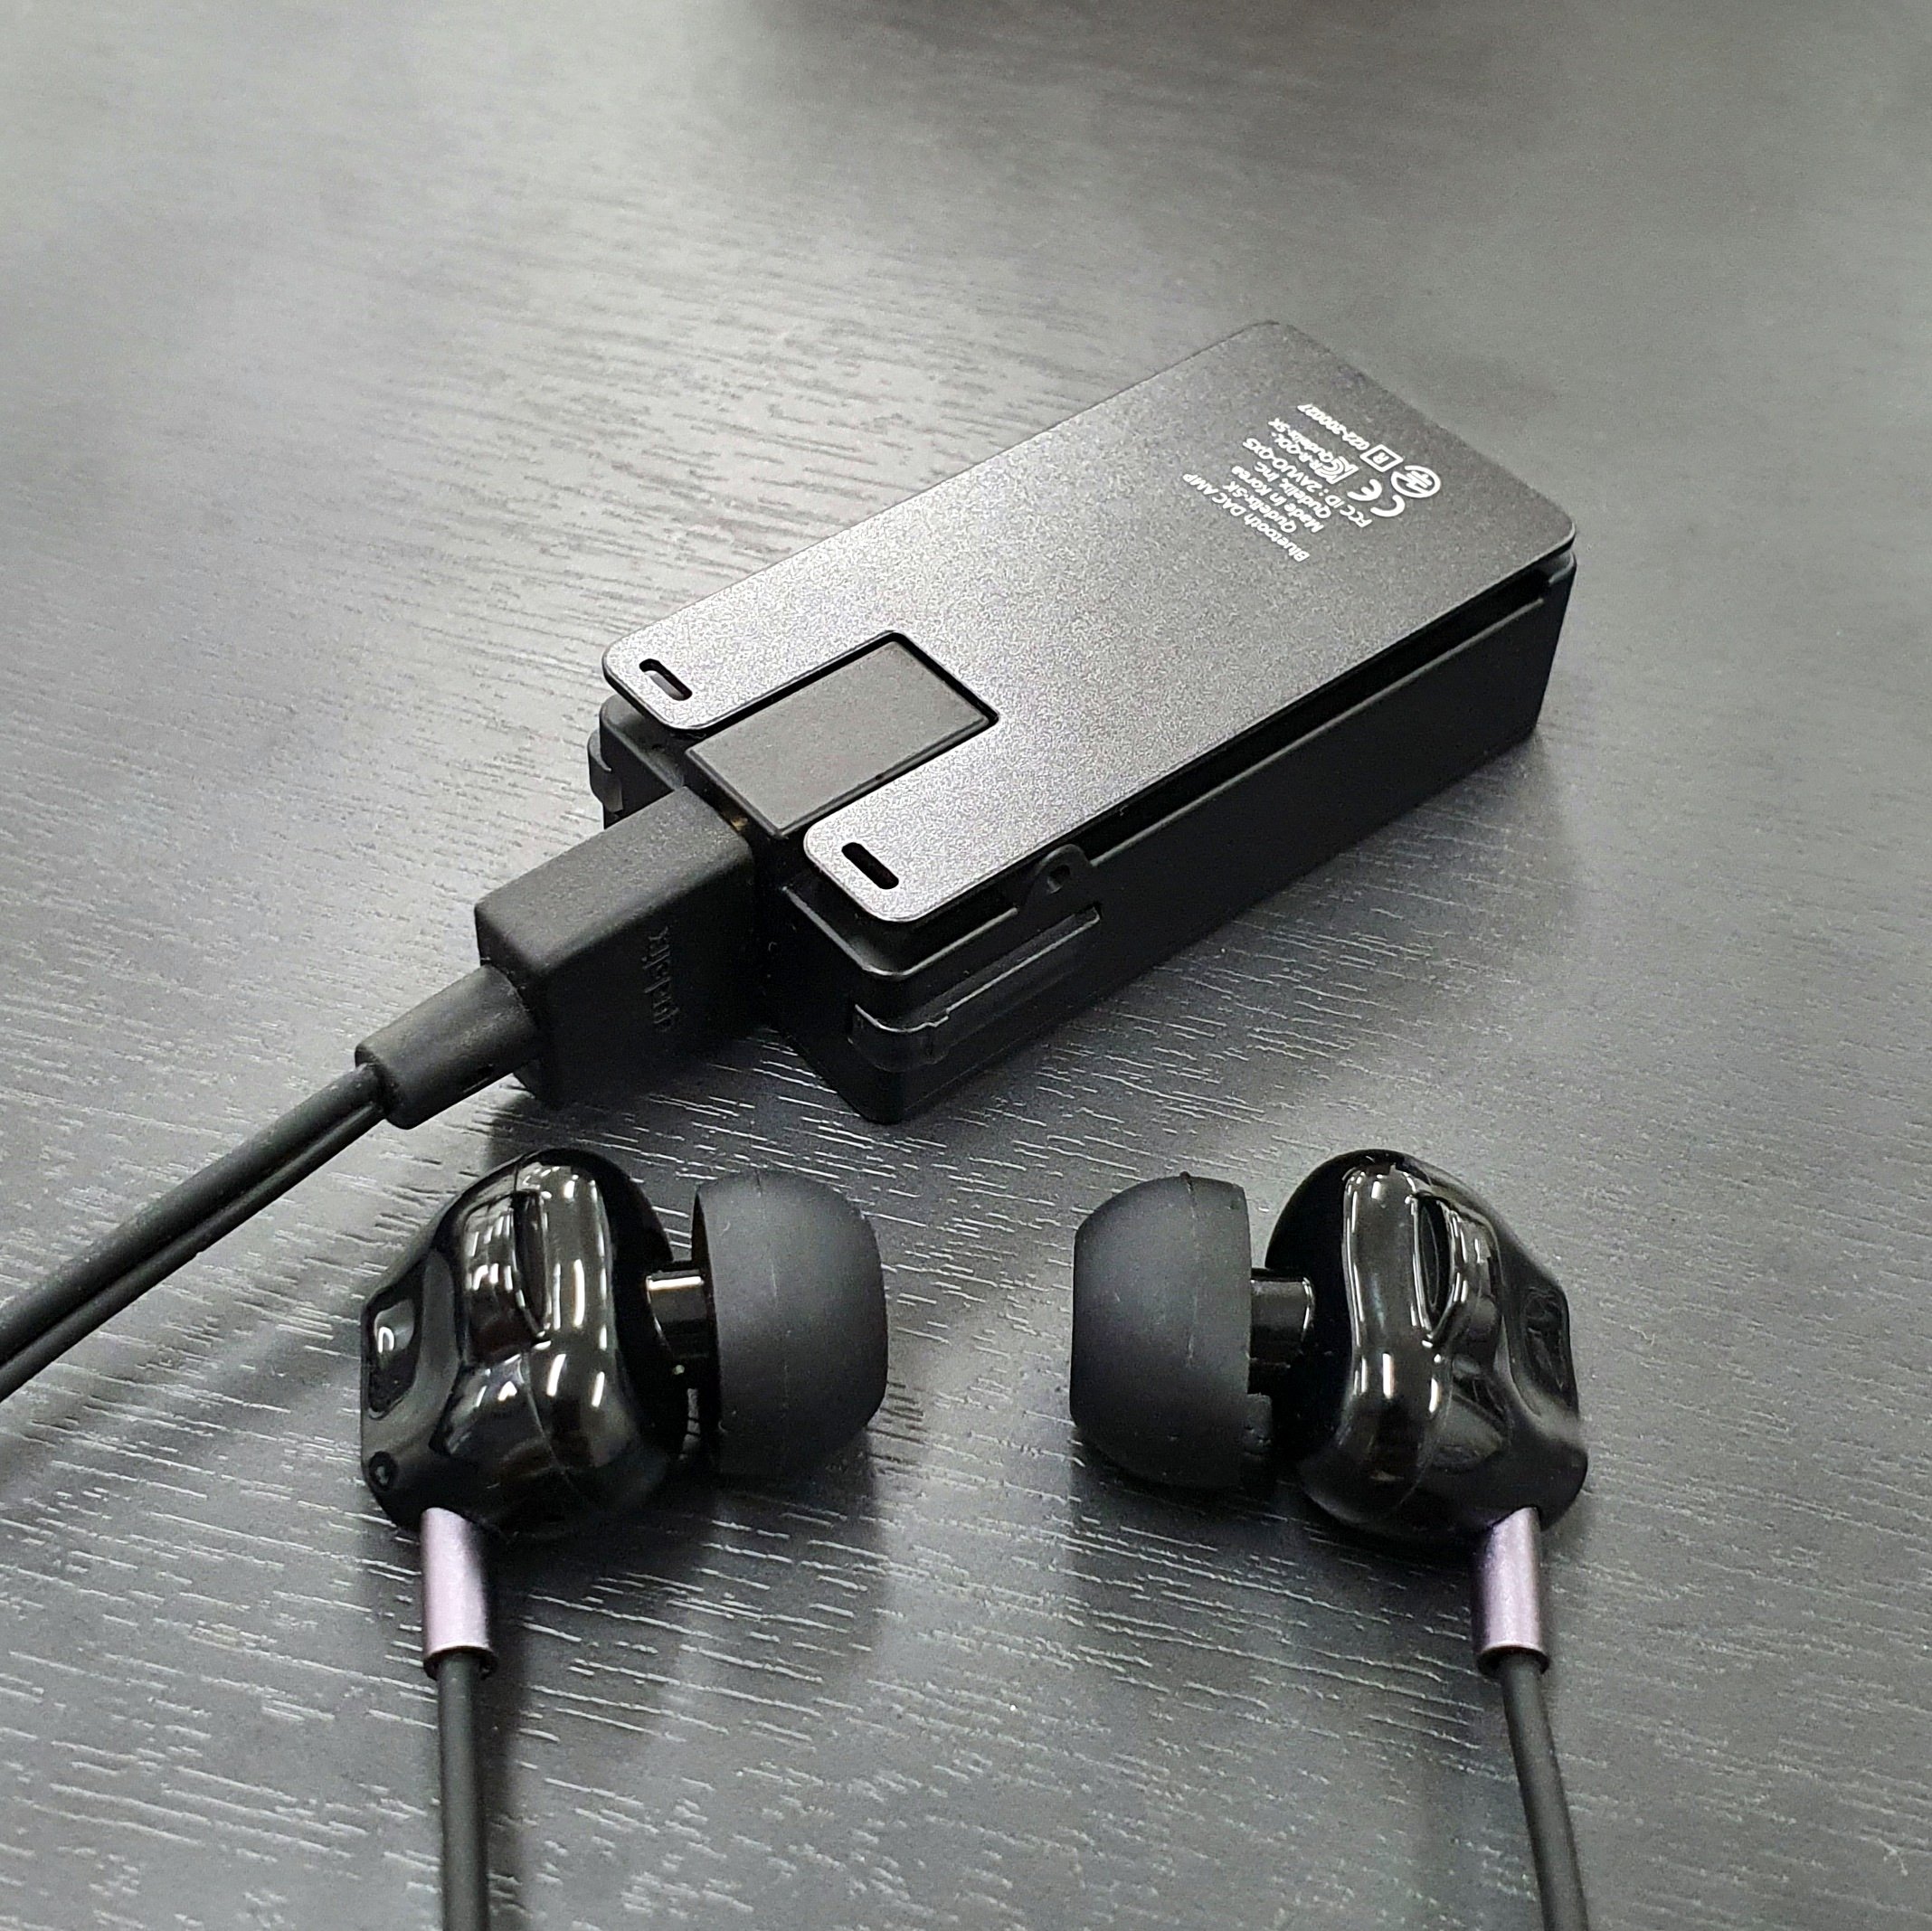 Qudelix-5K Reference DAC AMP & QX-over Earphones for 5K DAC/AMP